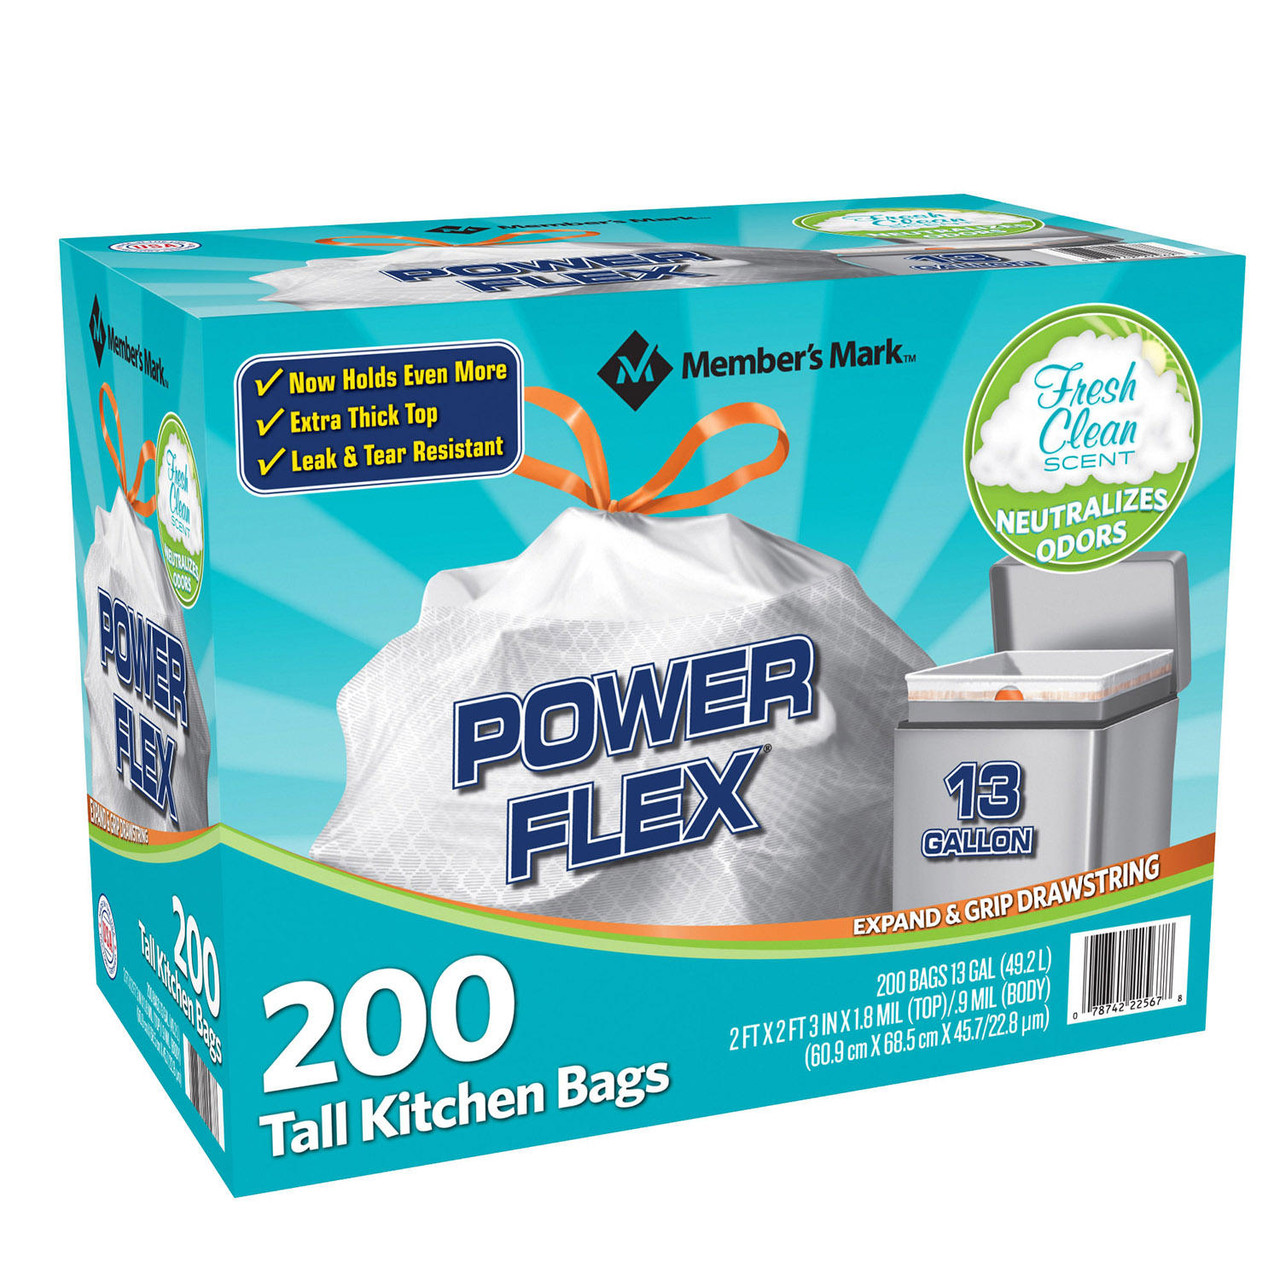 Member's Mark Power Flex Tall Kitchen Drawstring Trash Bags (13 Gallon, 2 Rolls of 100 ct., 200 count total) - [From 80.00 - Choose pk Qty ] - *Ships from Miami